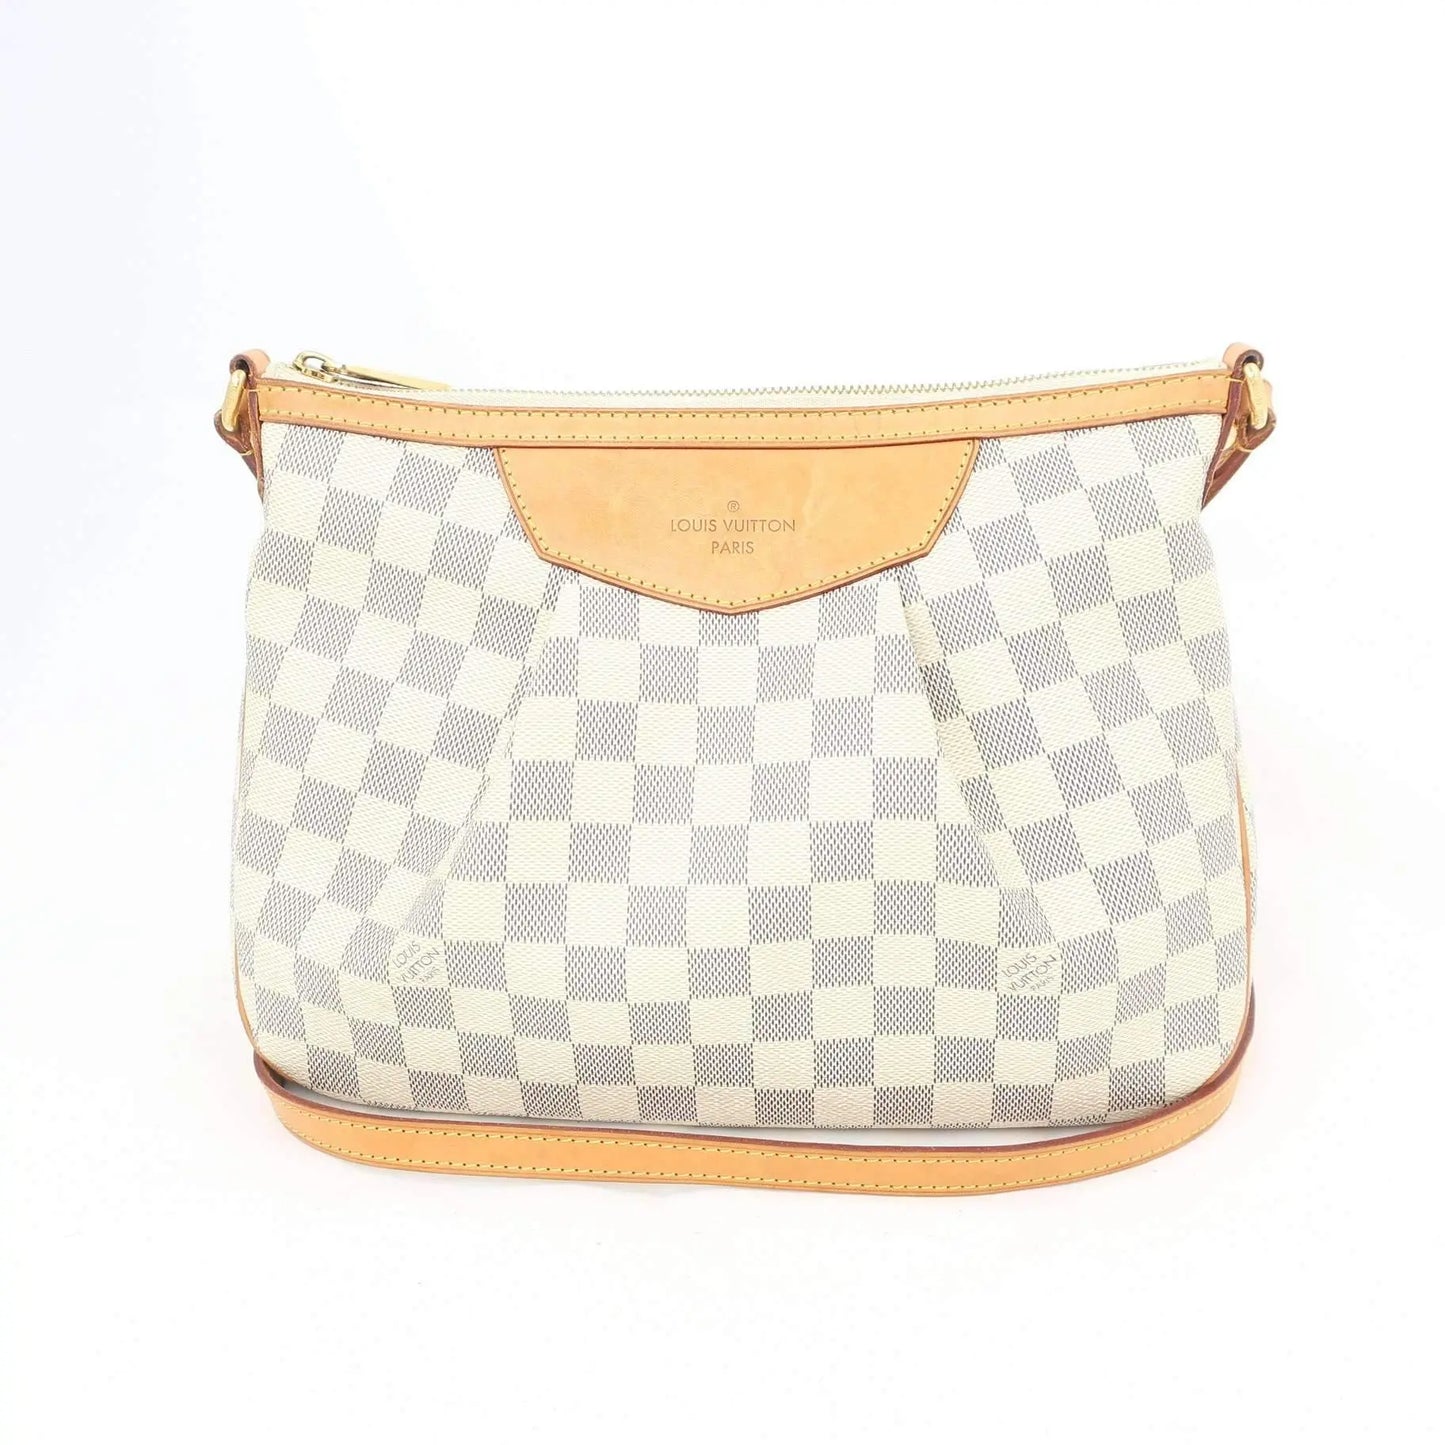 Sold at Auction: Louis Vuitton, LOUIS VUITTON SIRACUSA IVORY